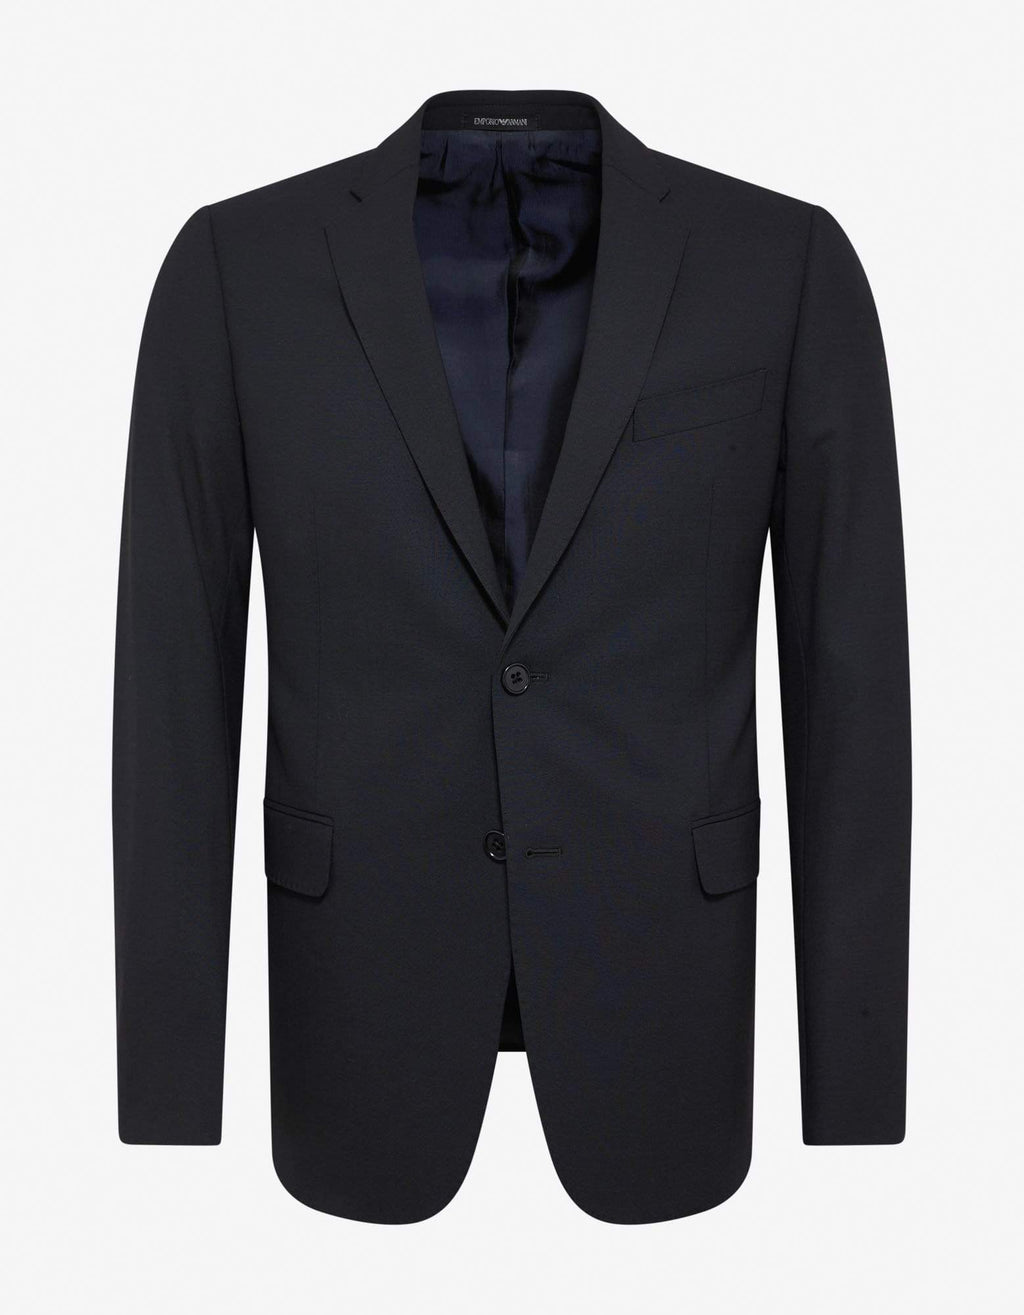 Emporio Armani Navy Blue Wool-Blend Two-Button Suit